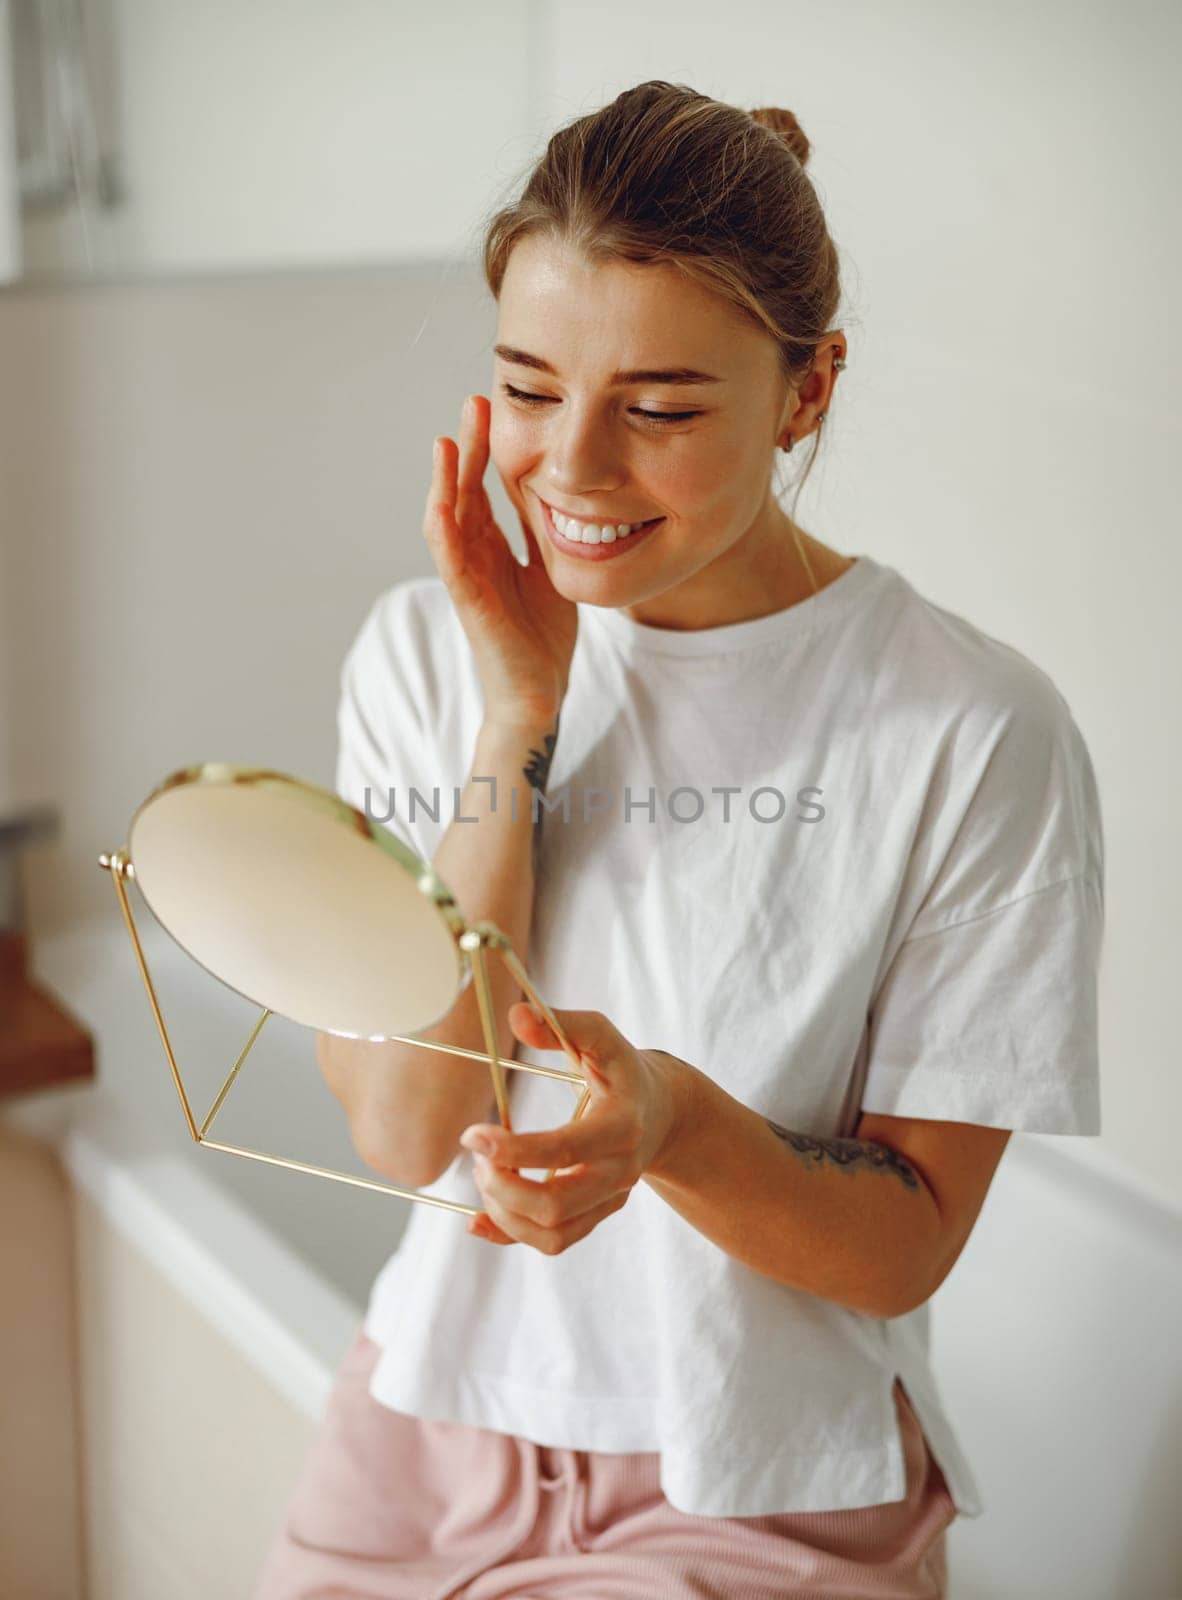 Smiling beautiful lady looking at her face in a small round mirror doing routine skincare procedures